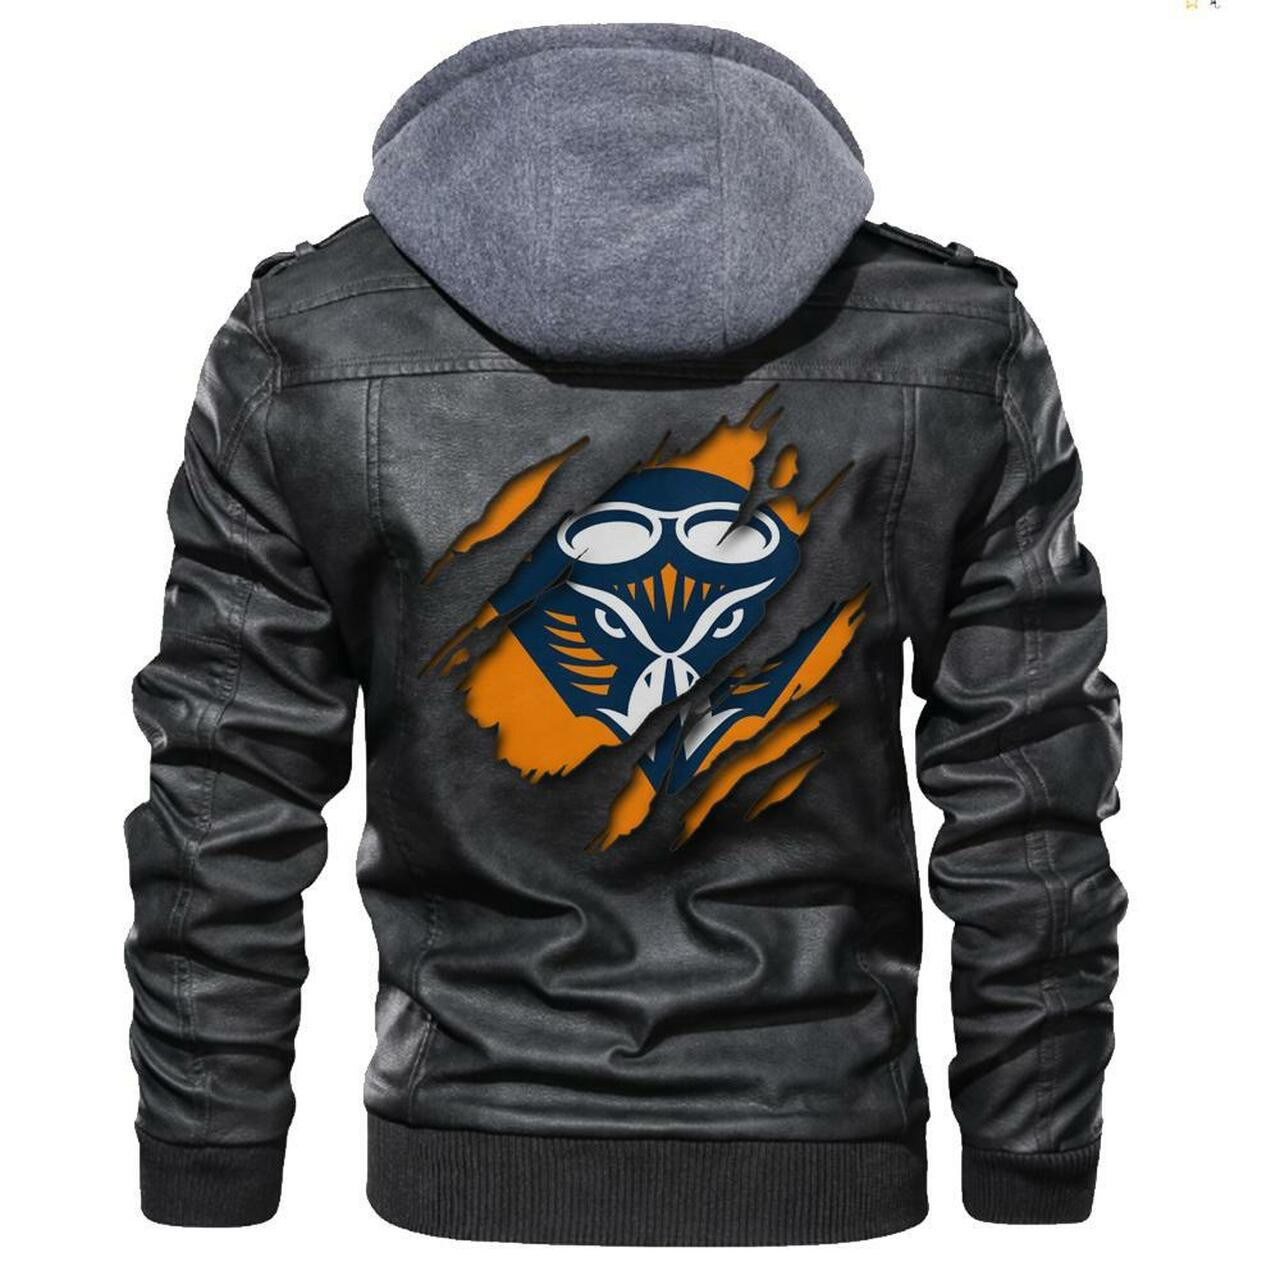 Don't wait another minute, Get Hot Leather Jacket today 85